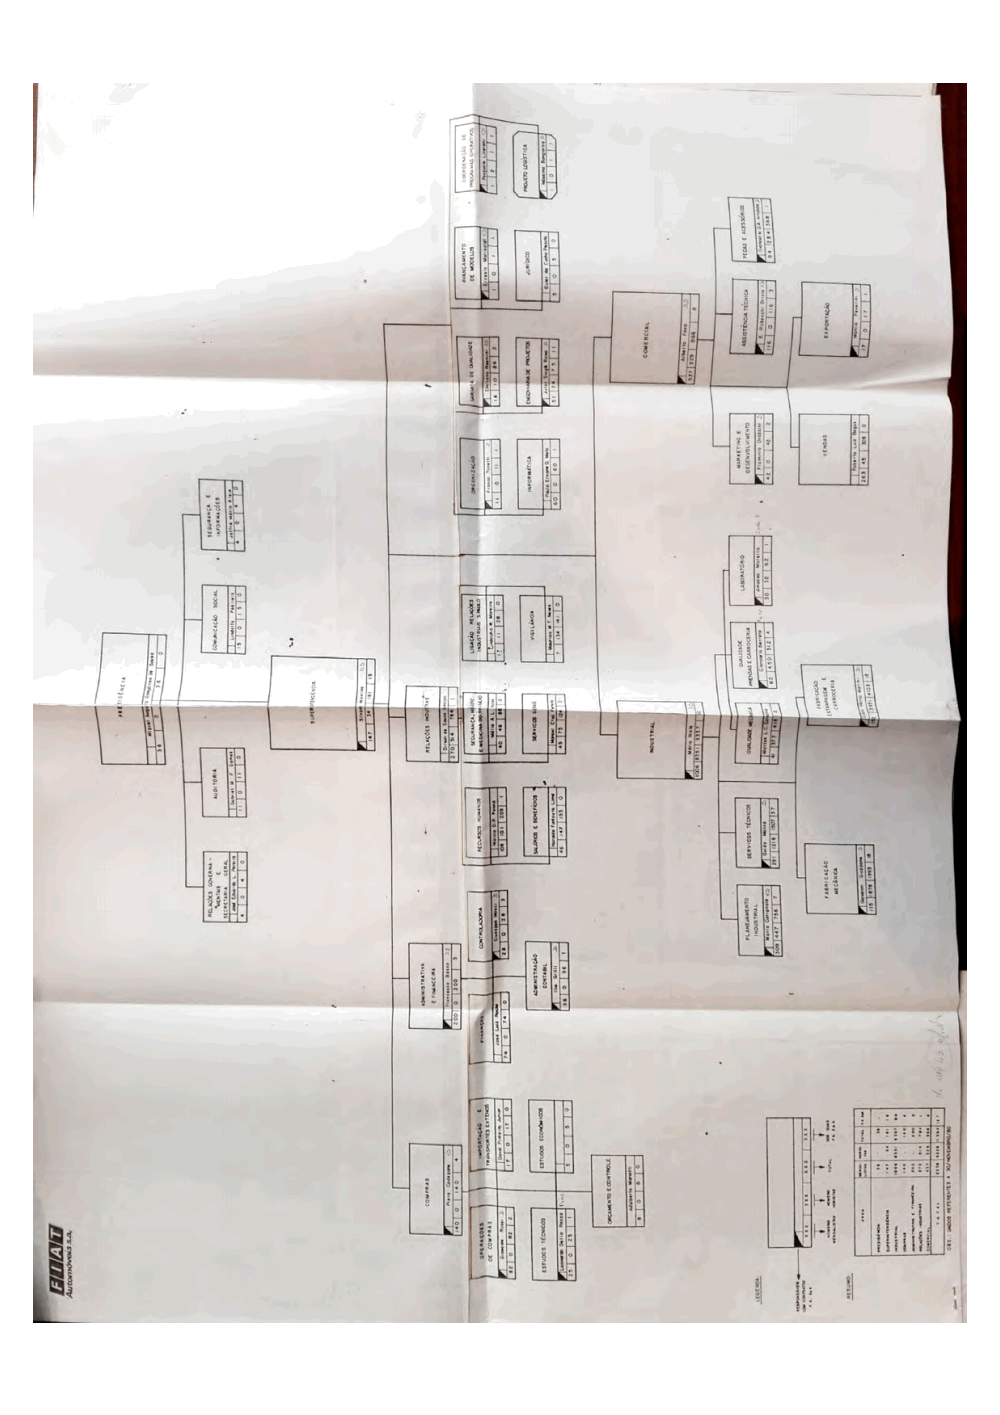 Page 2 from Archival organizational chart from Fiat’s Italian headquarters showing the Brazilian security apparatus